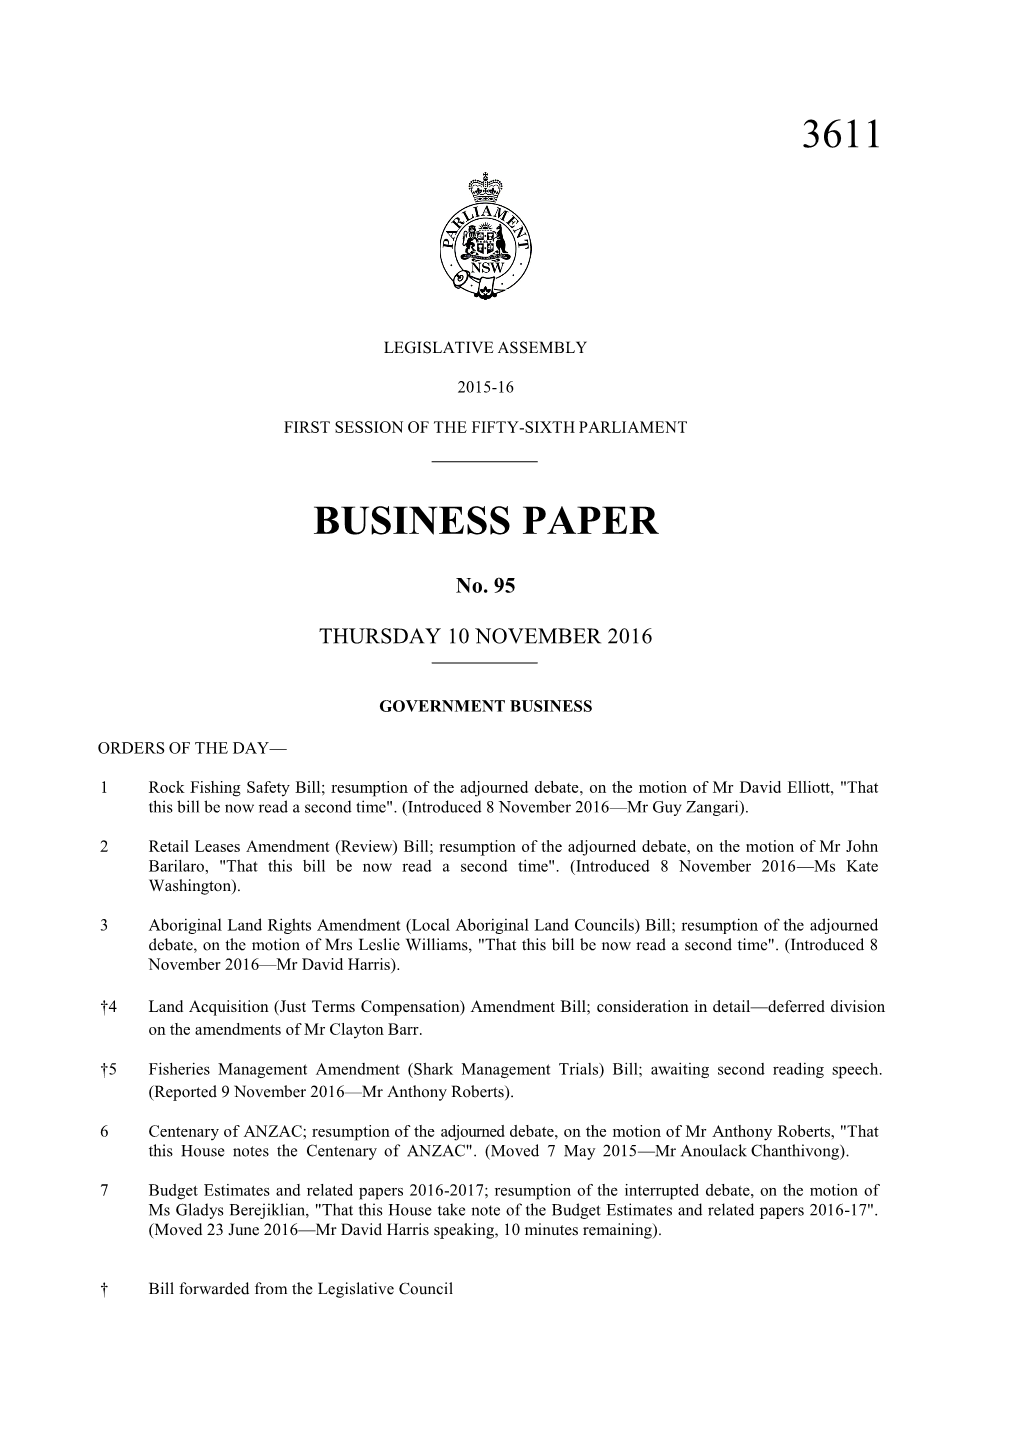 3611 Business Paper